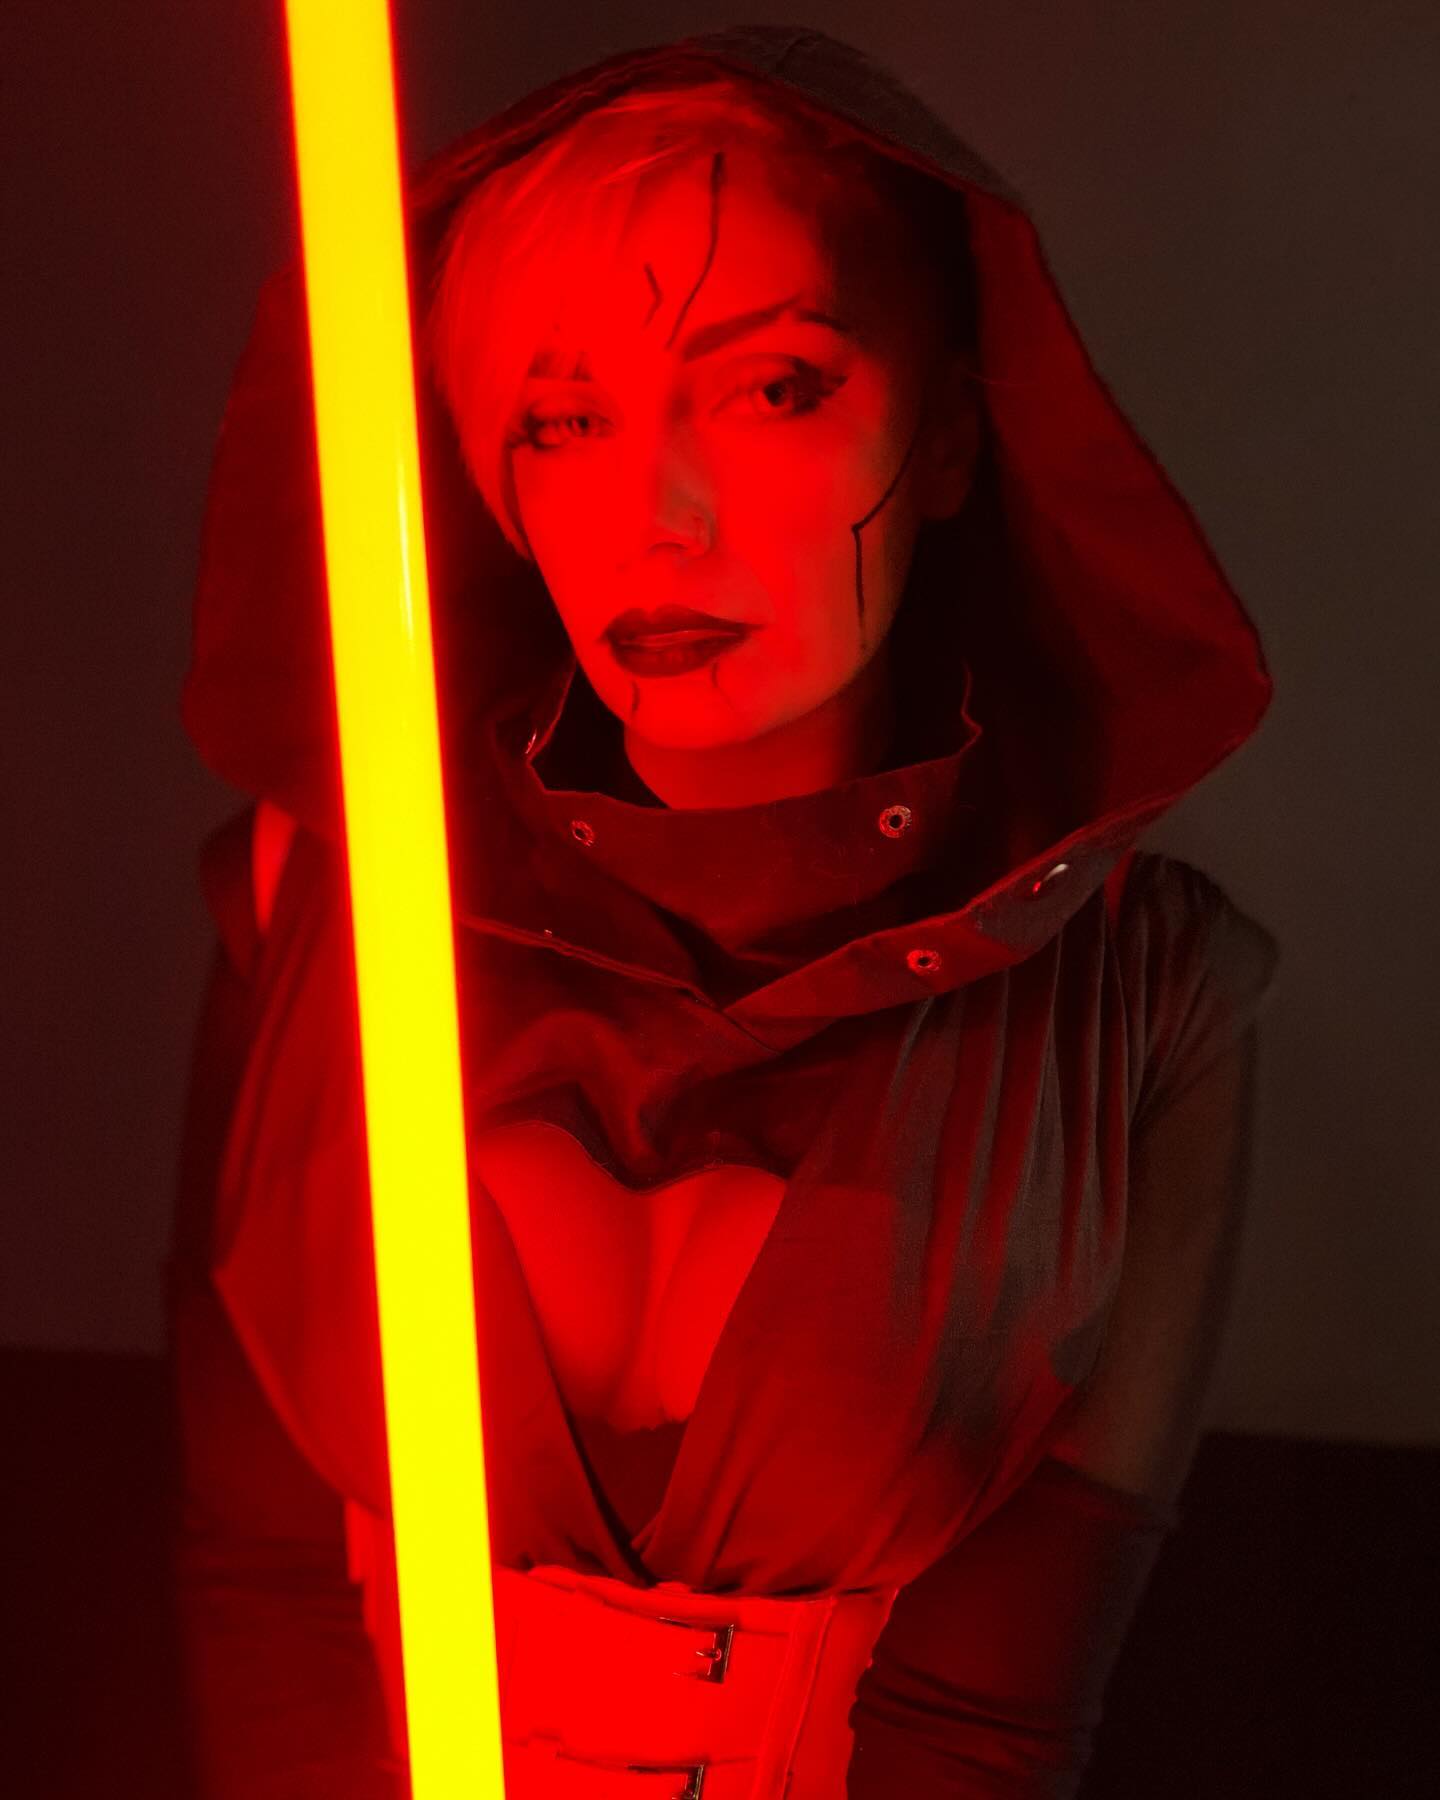 Happy Revenge of the Fifth!! 
📸 @paywallpax 
•
•
•
•
#revengeofthesith #revengeofthefifth #maythe4th #maythe4thbewithyou #starwars #sith #sithlord #sithcosplay #sithlife #starwarsoc #starwarsday